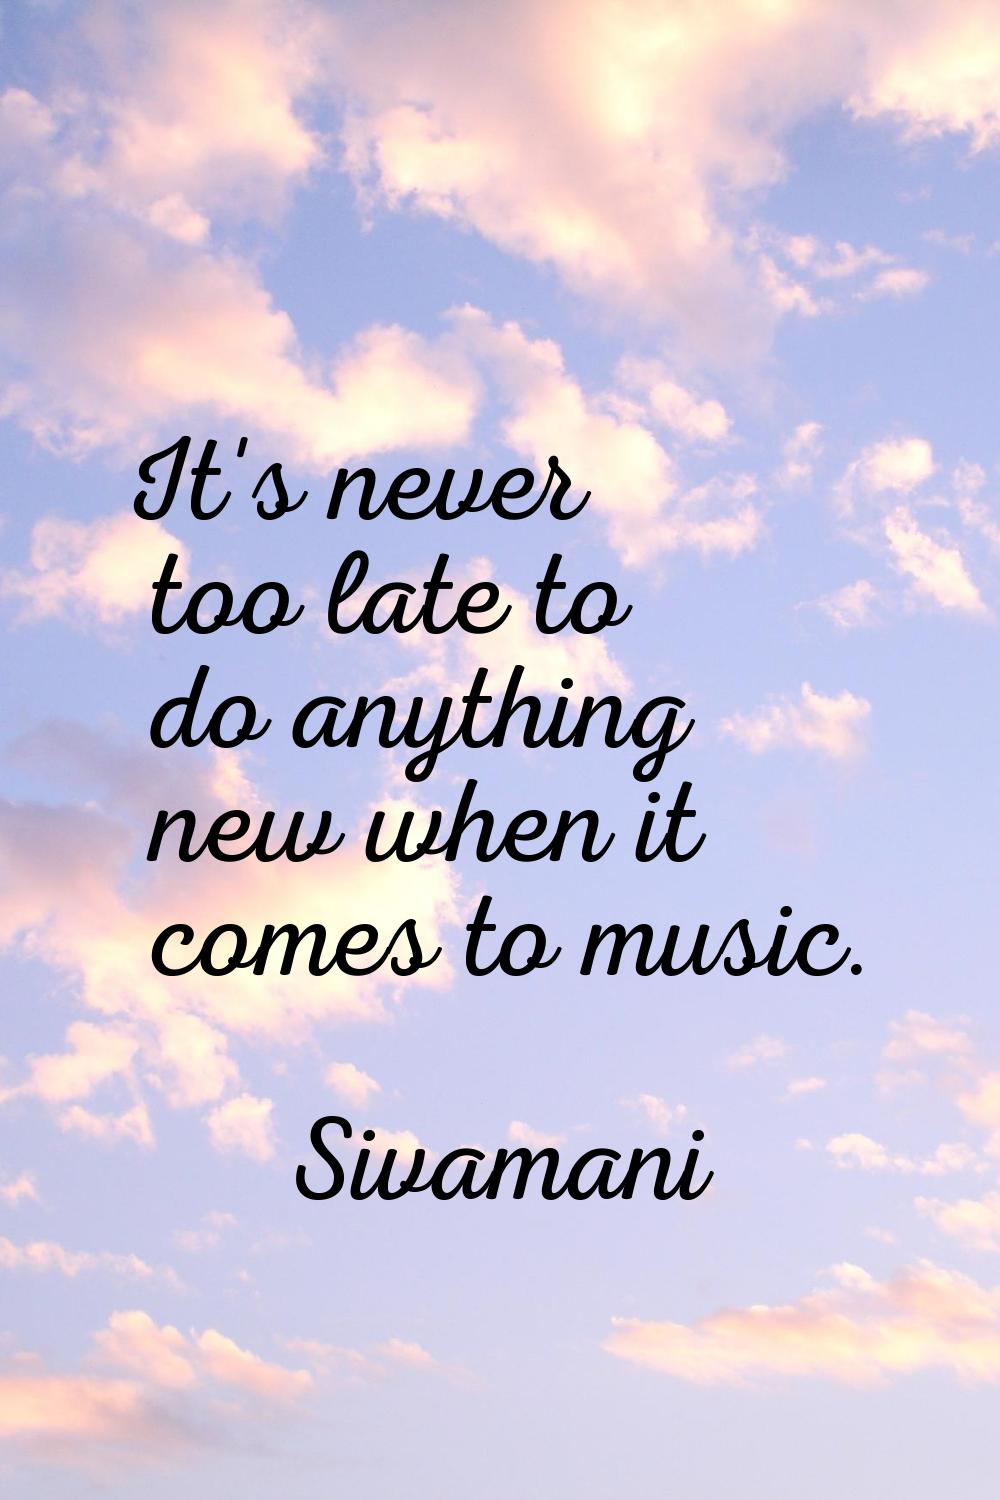 It's never too late to do anything new when it comes to music.